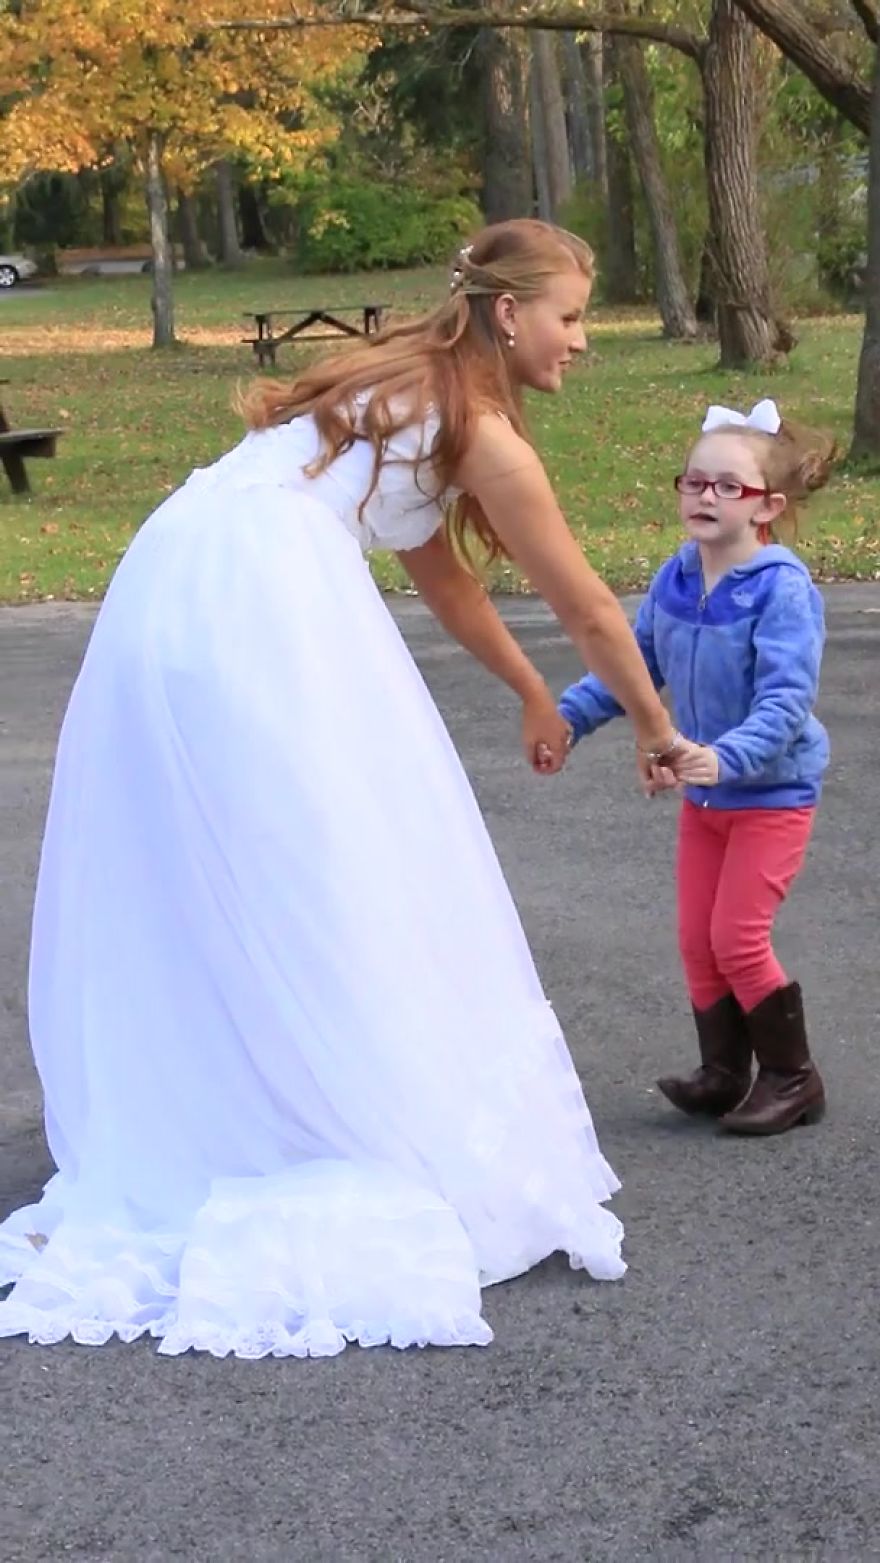 Girl With Autism Confuses Bride With Cinderella And Bride Raises Funds To Take Her To Disney World